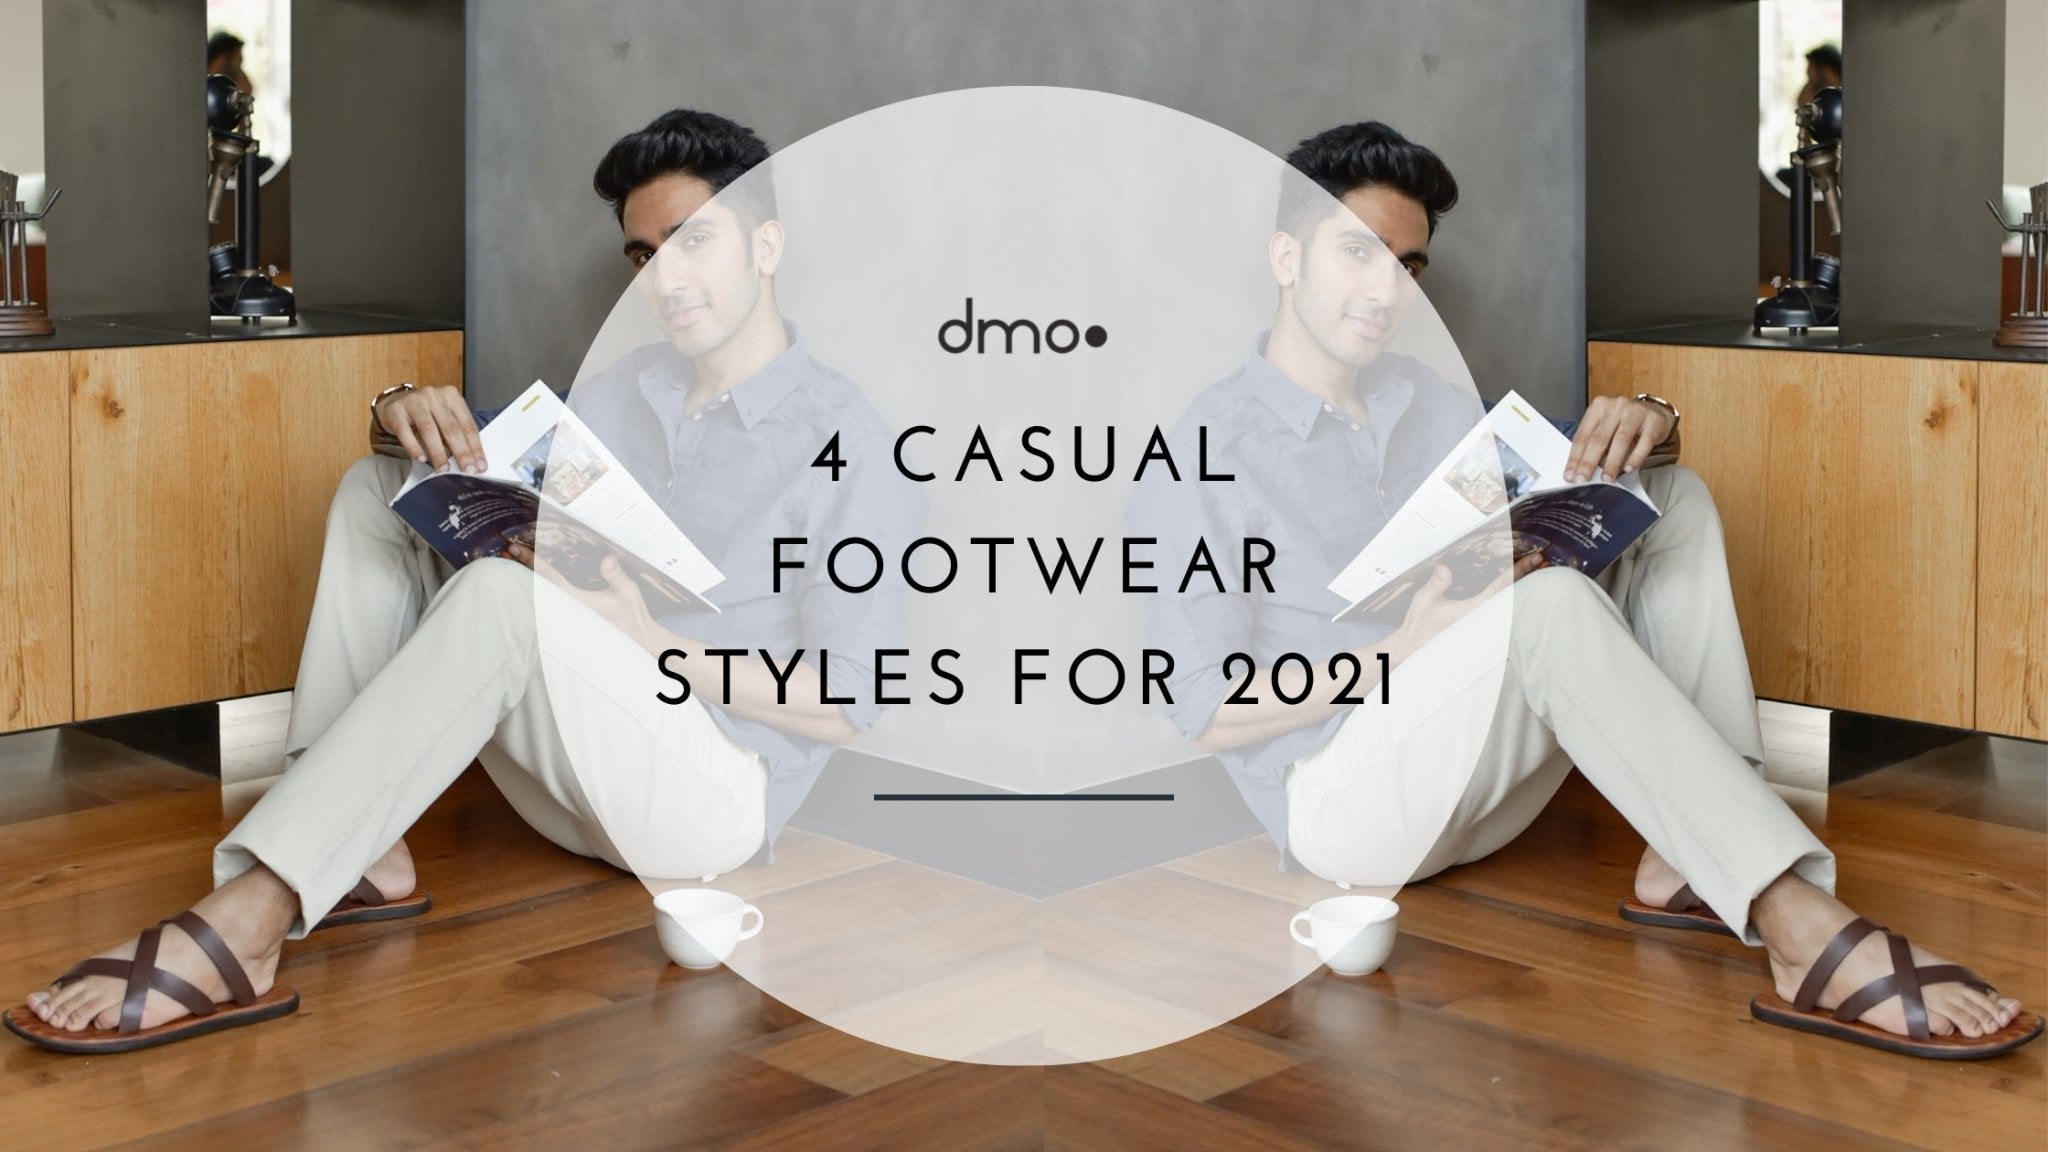 4 casual footwear styles for 2021 - dmodot Shoes